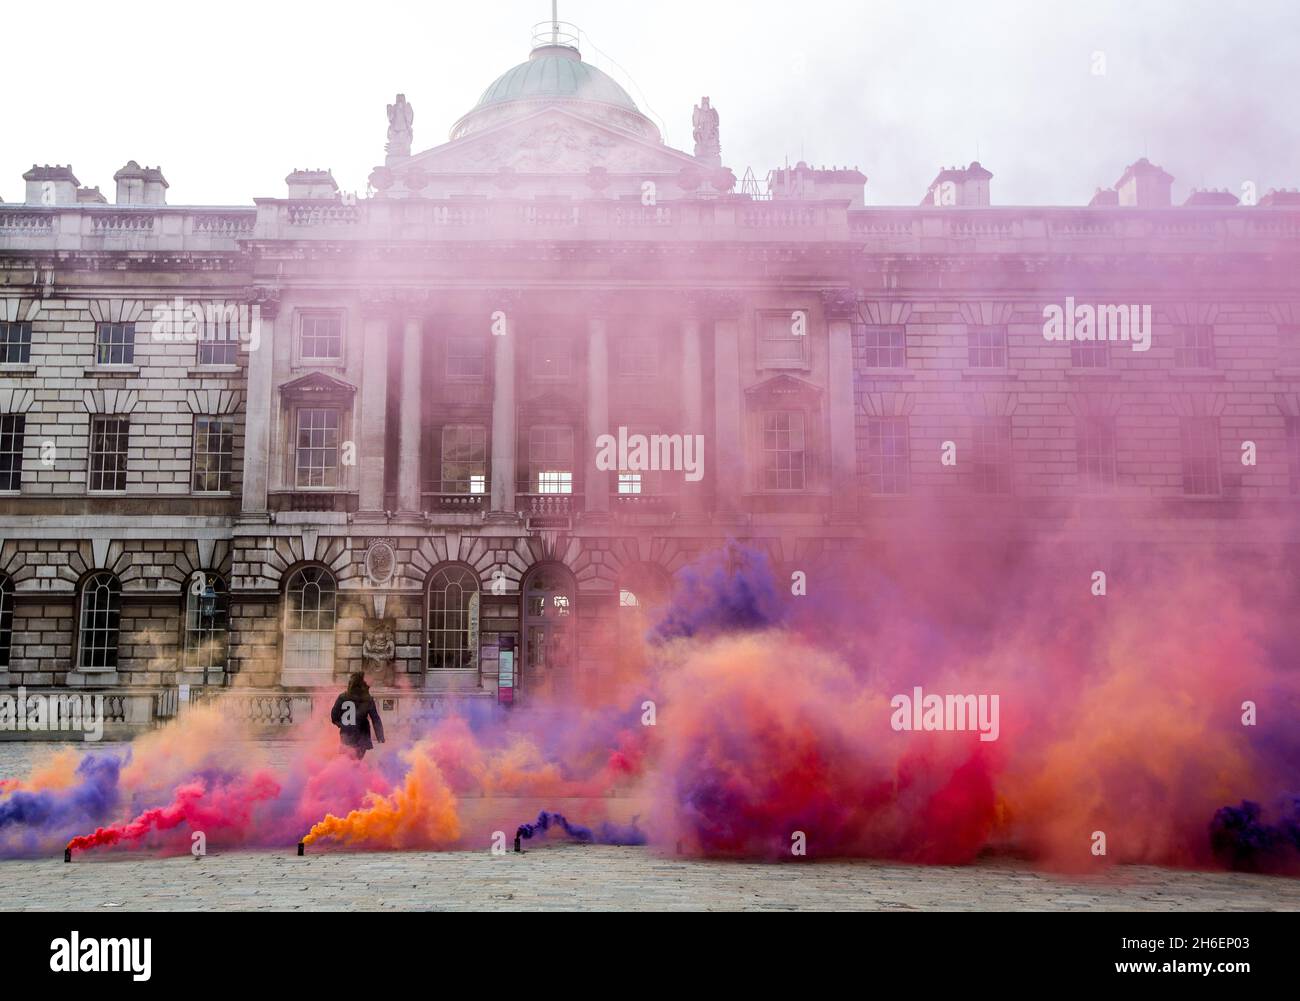 Artist Filippo Minelli's Silence / Shapes ...  Letting off a series of colourful smoke bombs in Somerset Houseâ€™s courtyard in London  Filippo Minelli started the ongoing series Silence/Shapes to give a physical shape to silence. As medium he chose chemicals used to create smokebombs and to juxtapose them with the romantic idea of beauty of the natural landscapes.   Stock Photo